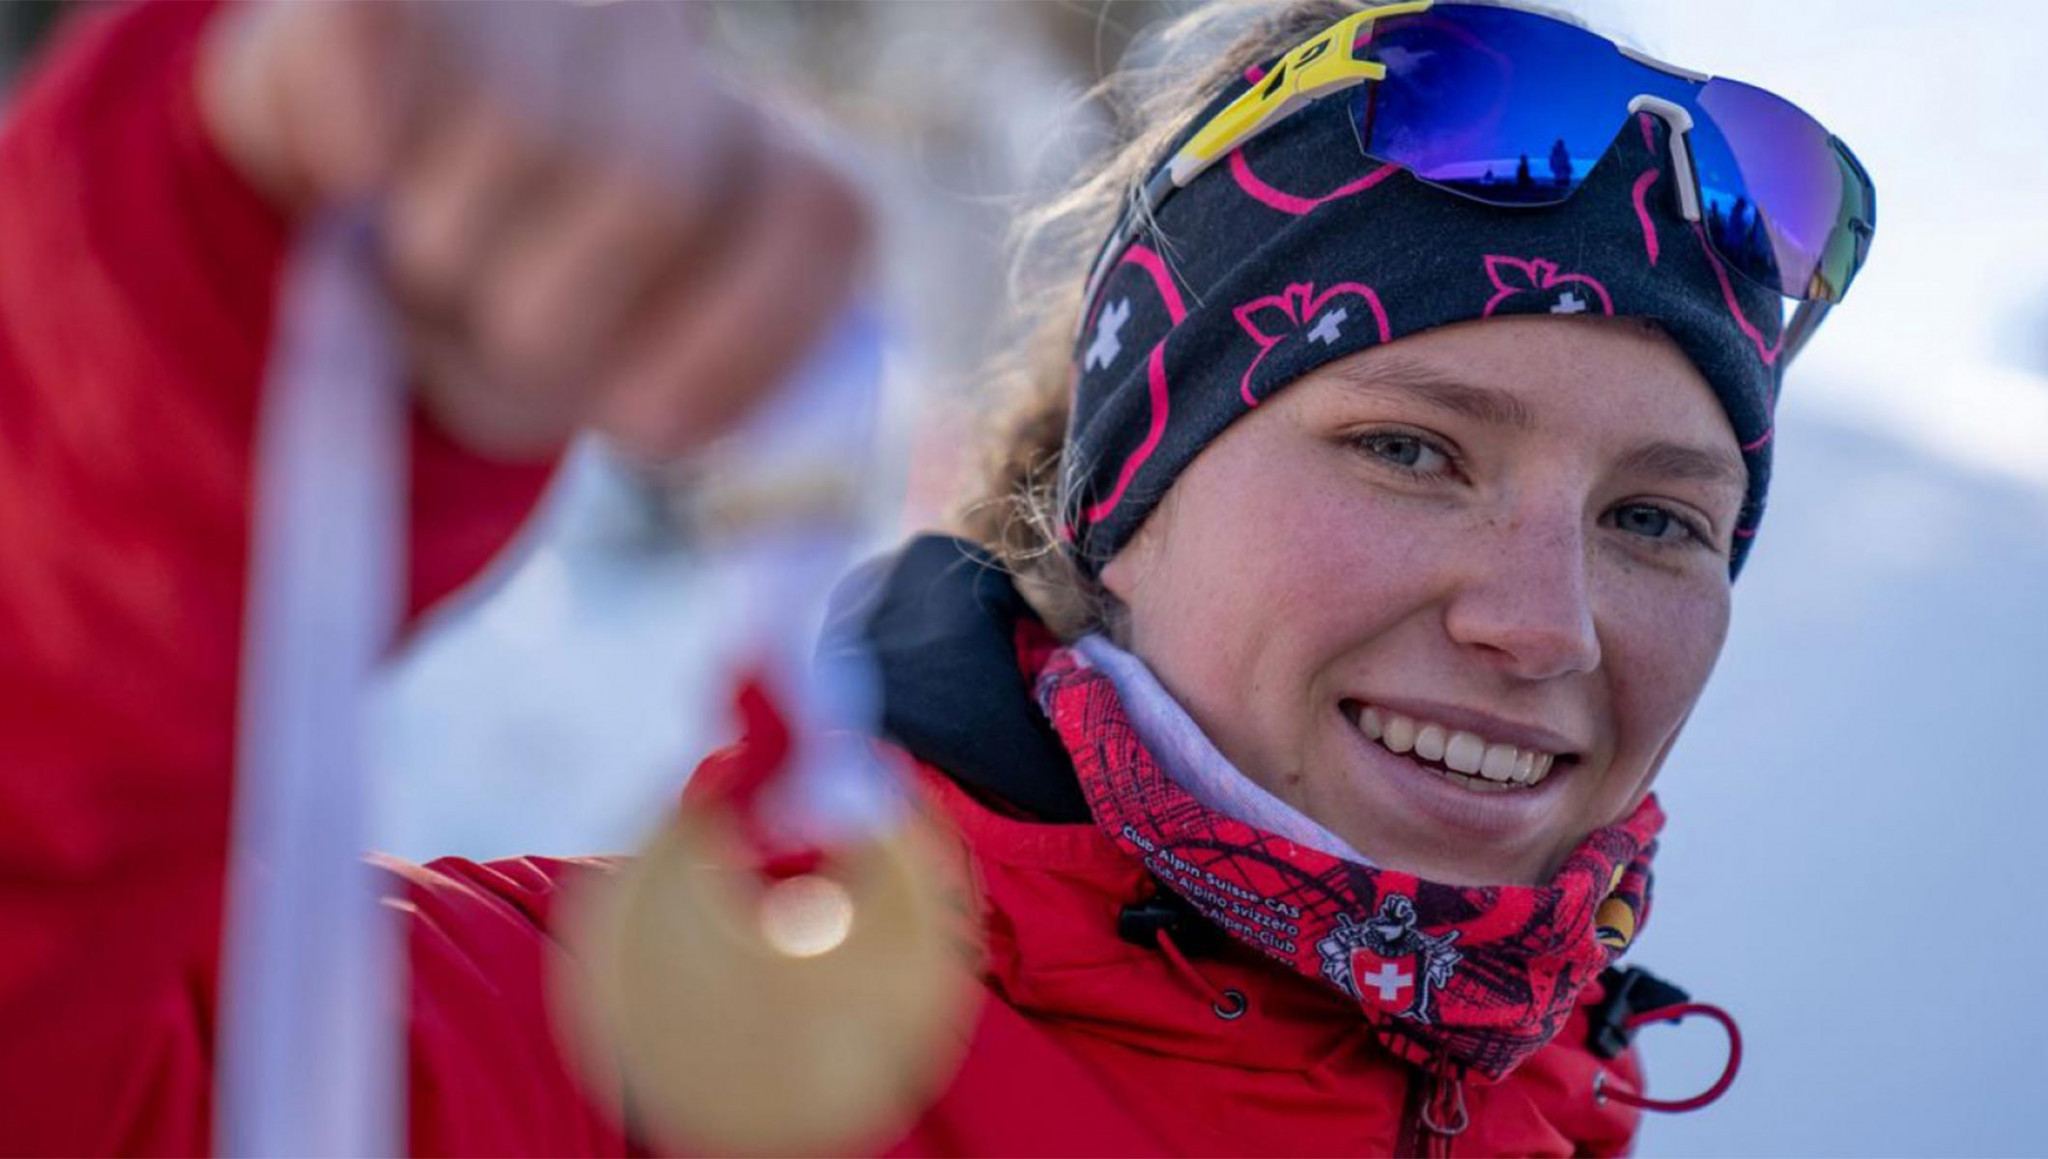 Thibe Deseyn is relishing competing in ski mountaineering at Lausanne 2020 ©IOC